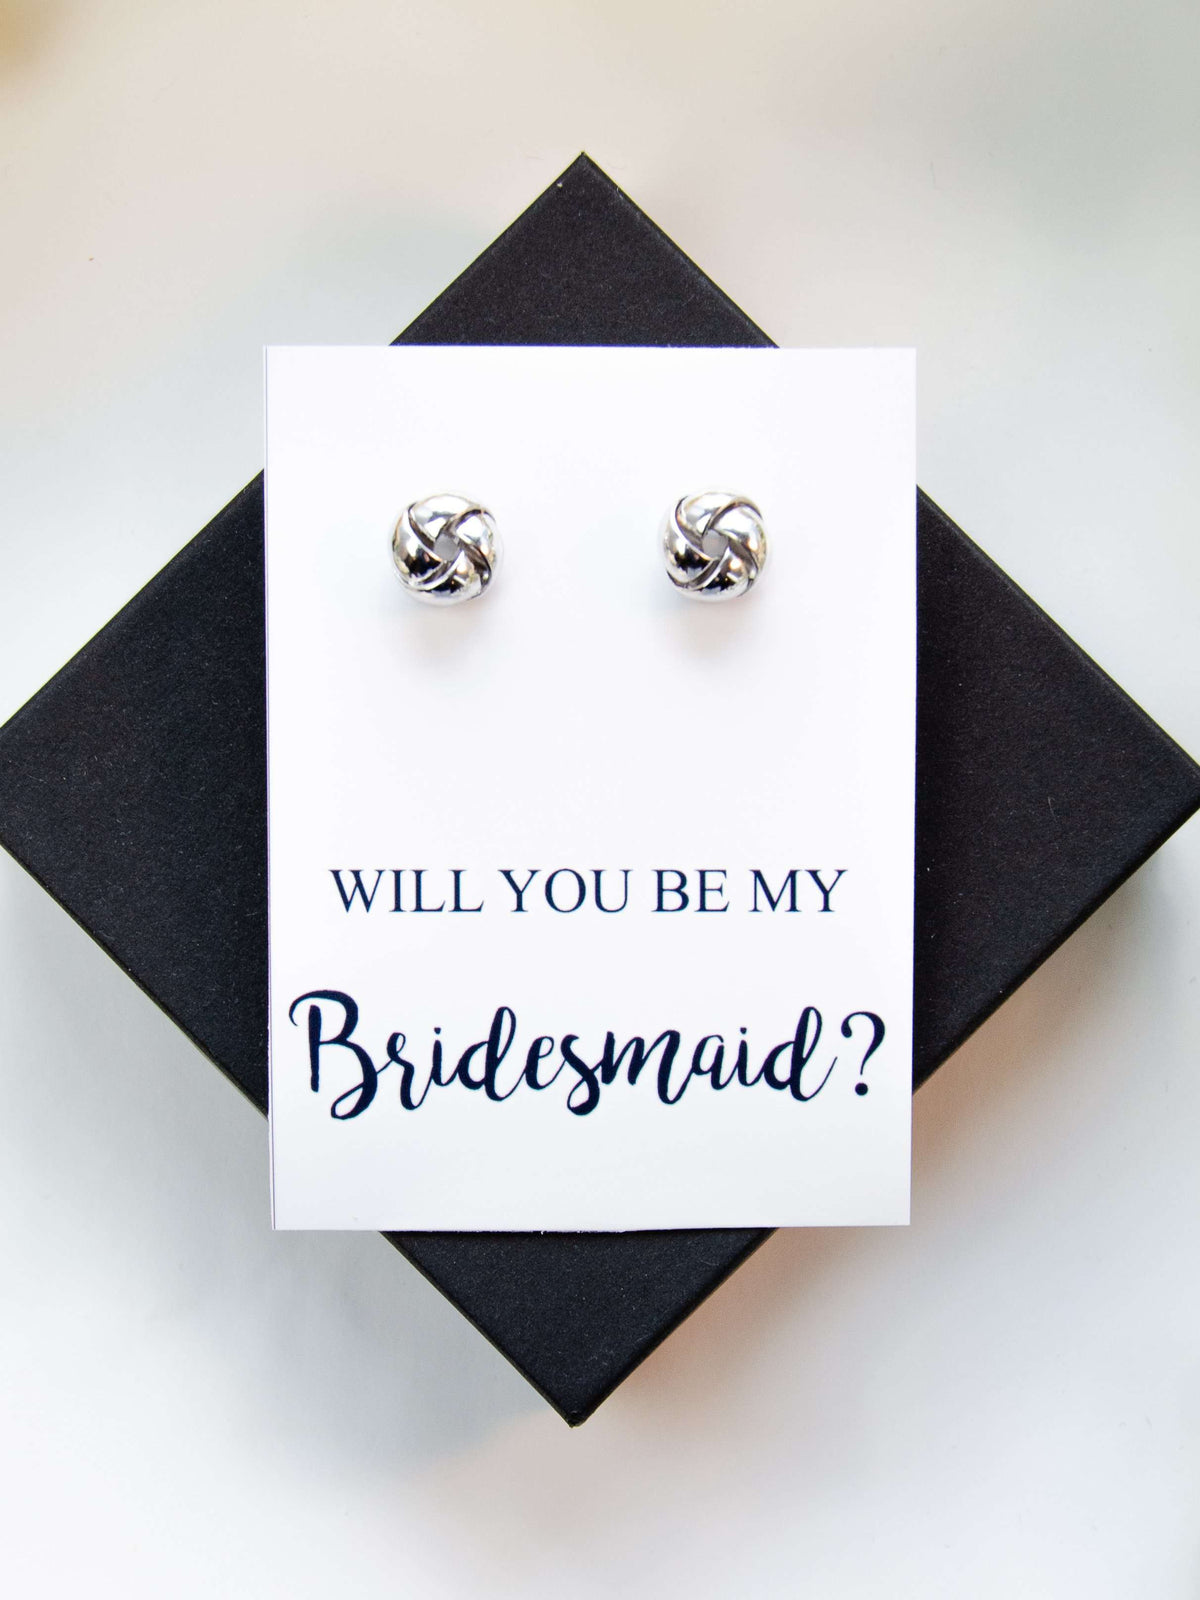 Will You Be My Bridesmaid? Silver Proposal Knot Earrings